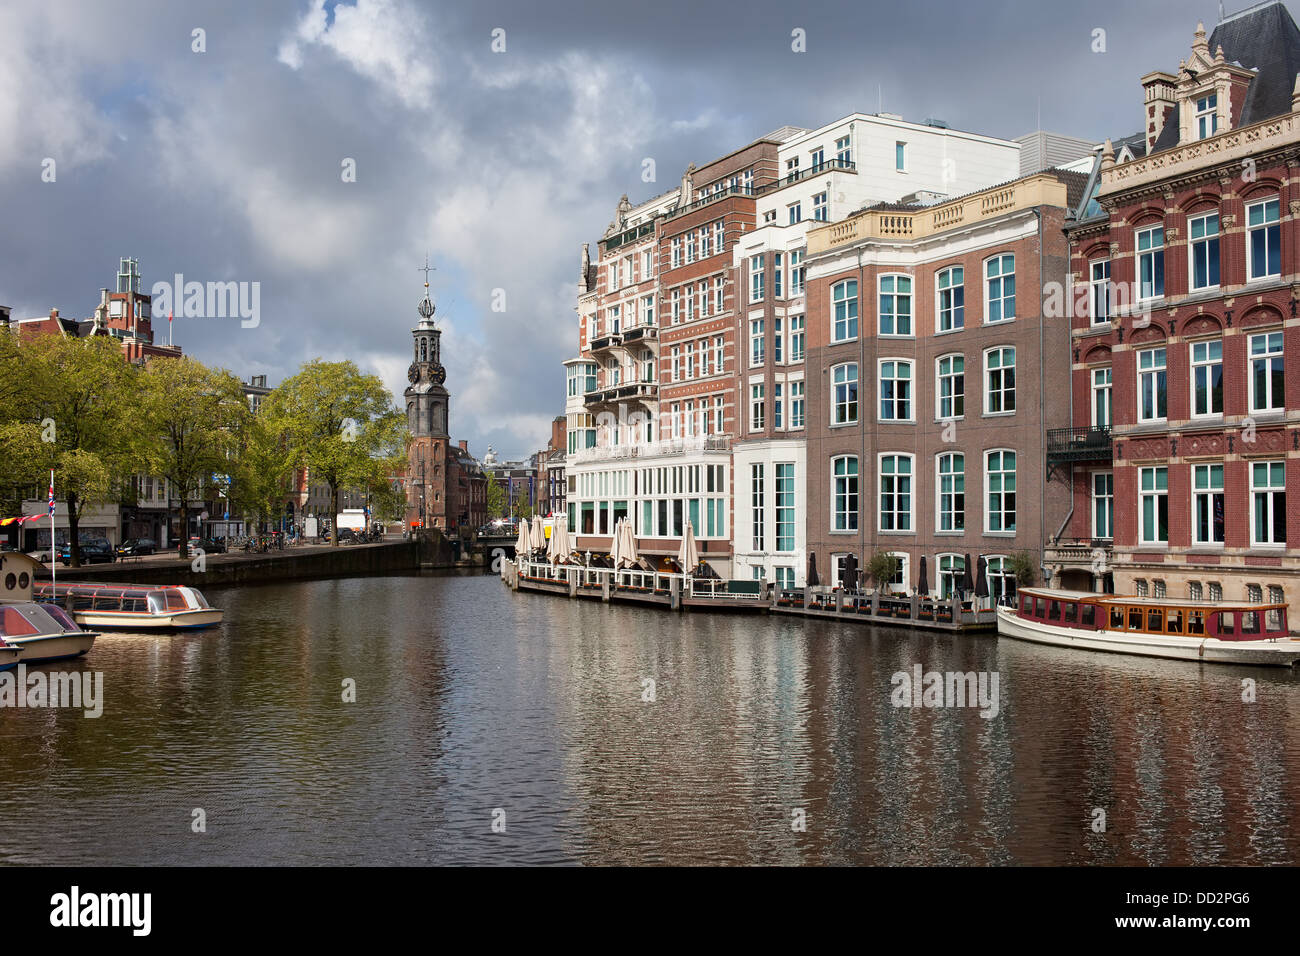 City of Amsterdam by the river Amstel in Netherlands, Mint Tower (Munttoren) at the far end. Stock Photo